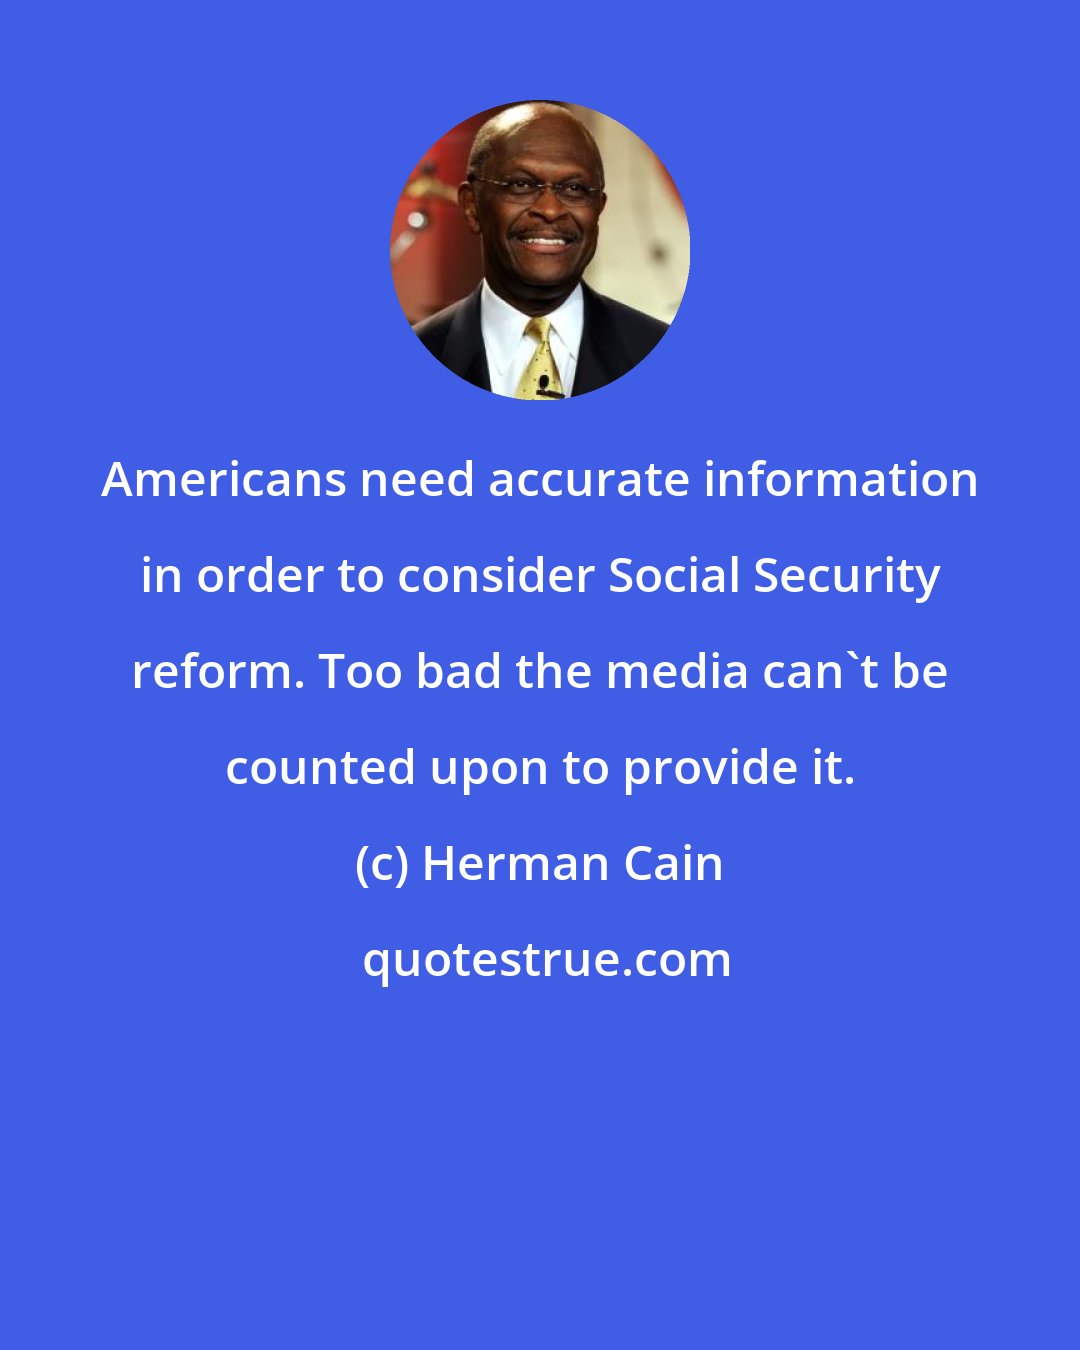 Herman Cain: Americans need accurate information in order to consider Social Security reform. Too bad the media can't be counted upon to provide it.